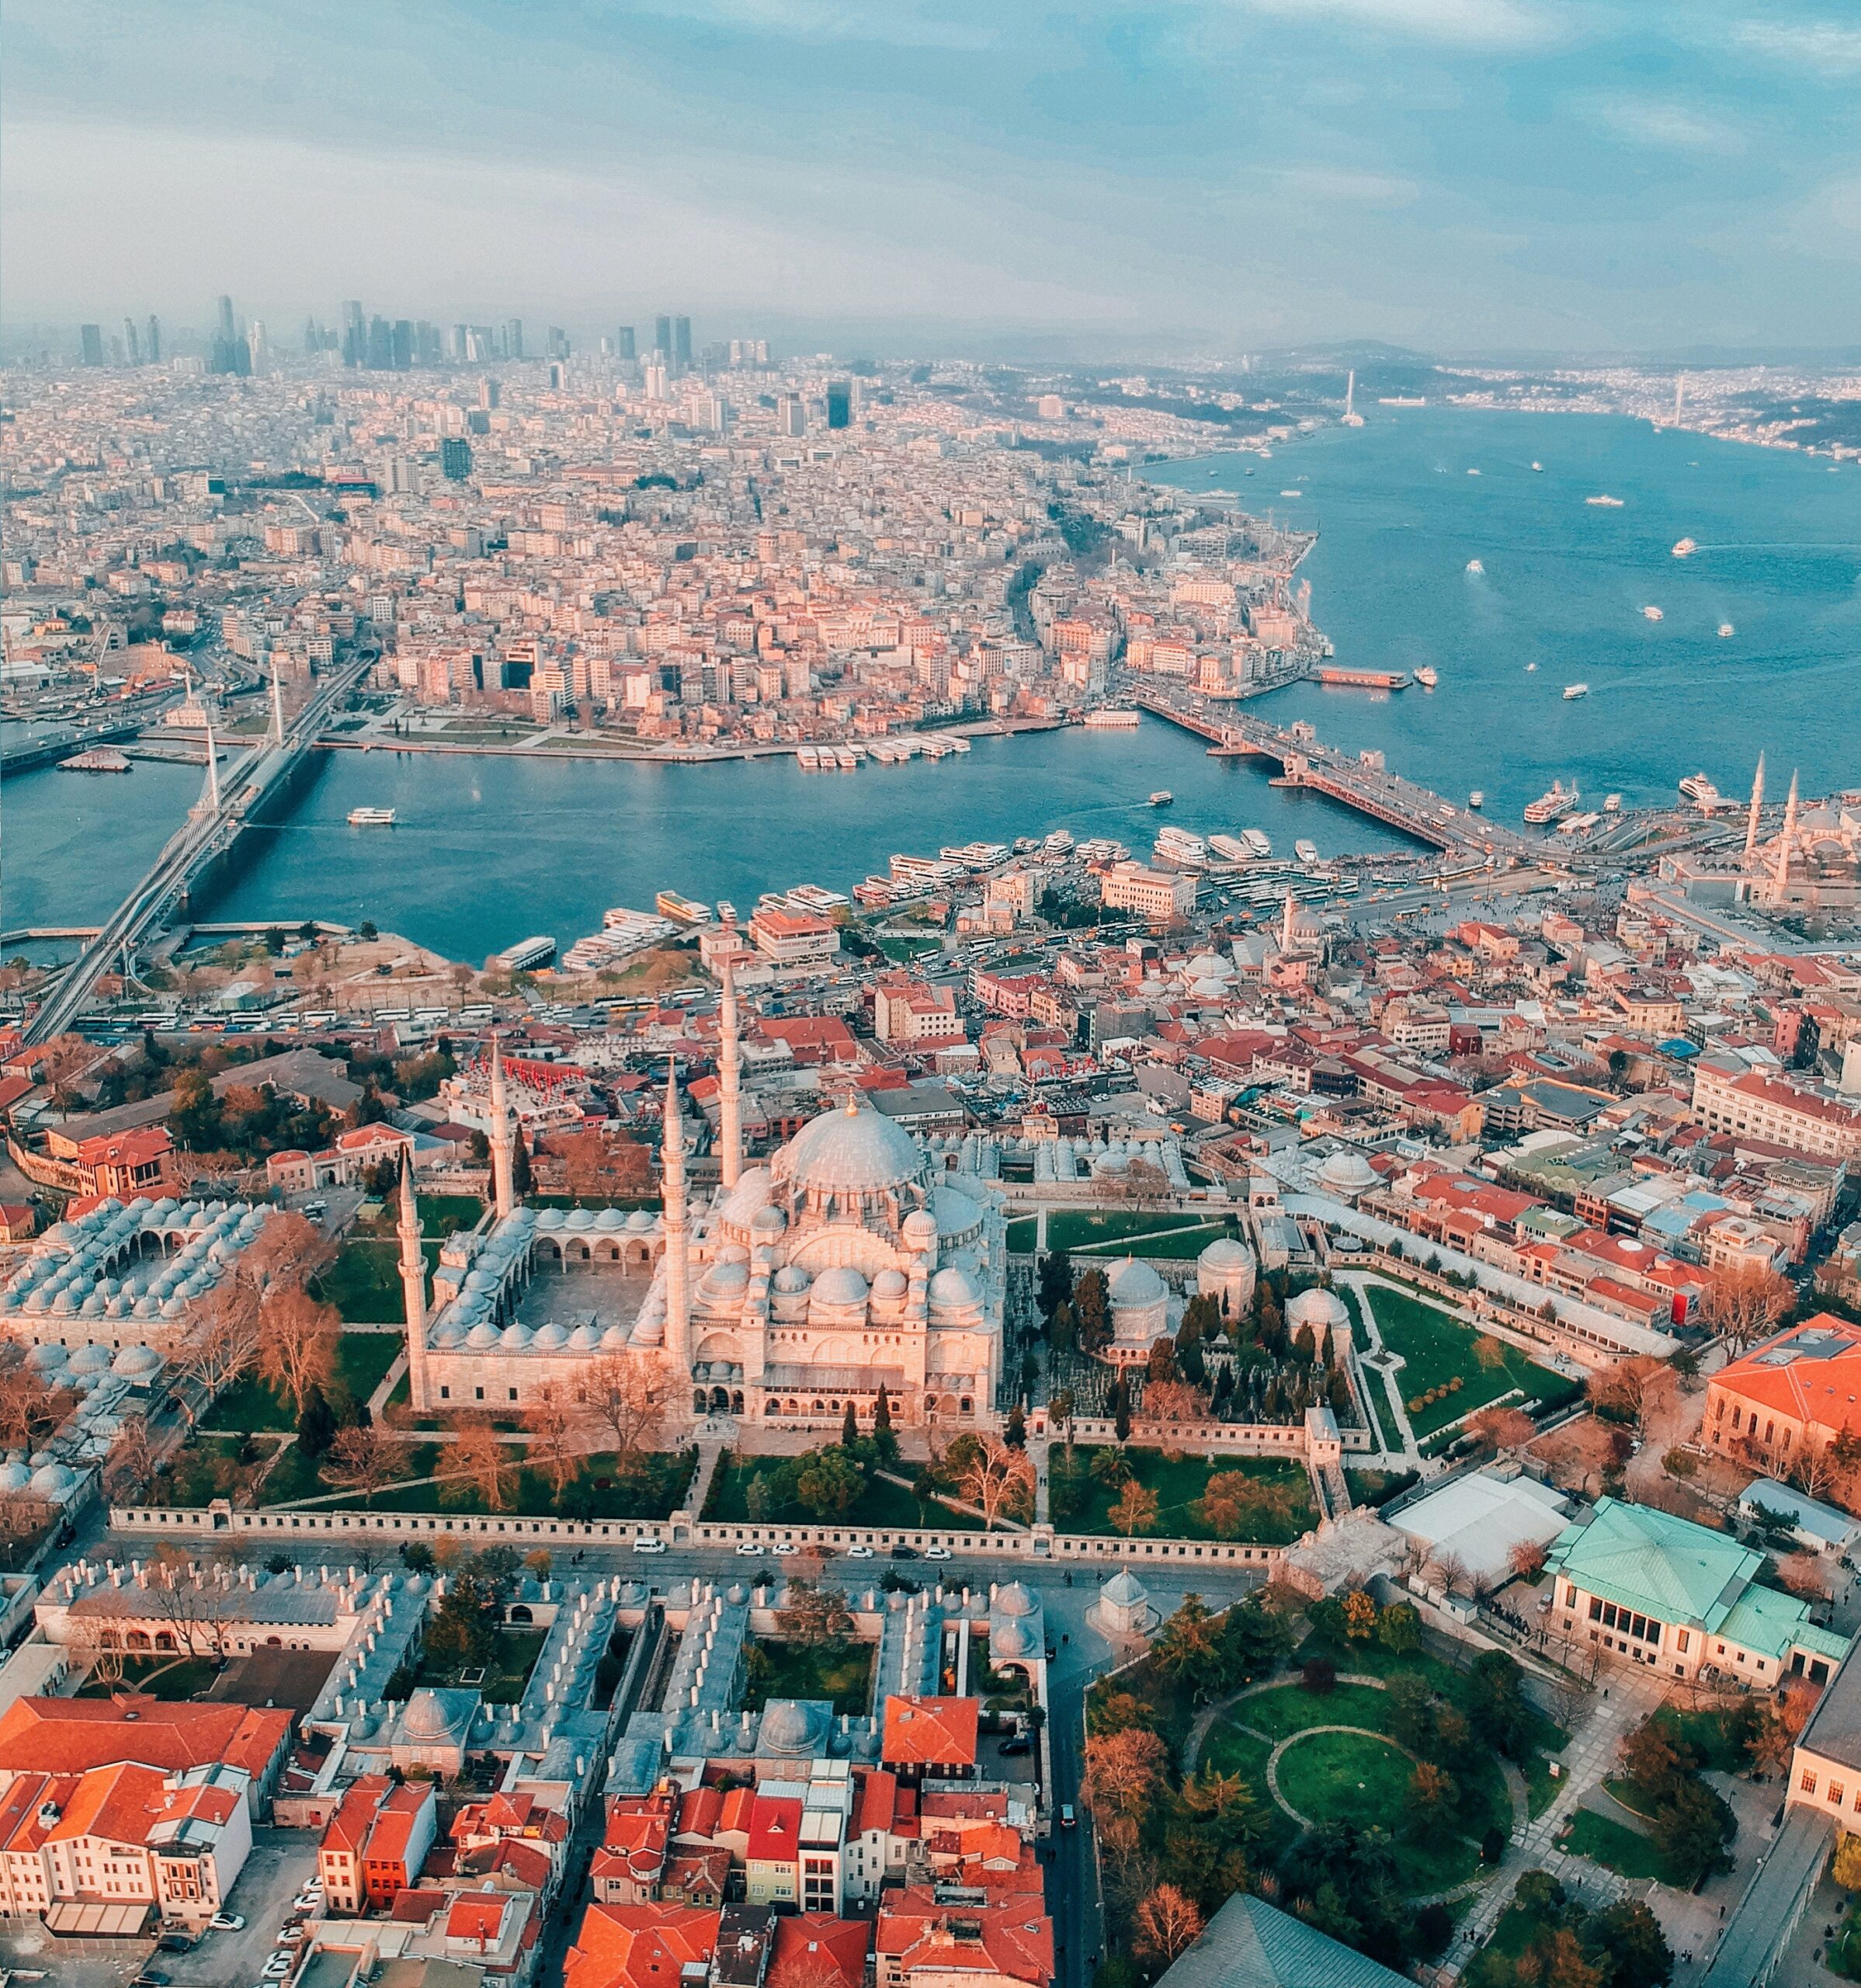 Why Isn’t Istanbul the capital of Turkey?